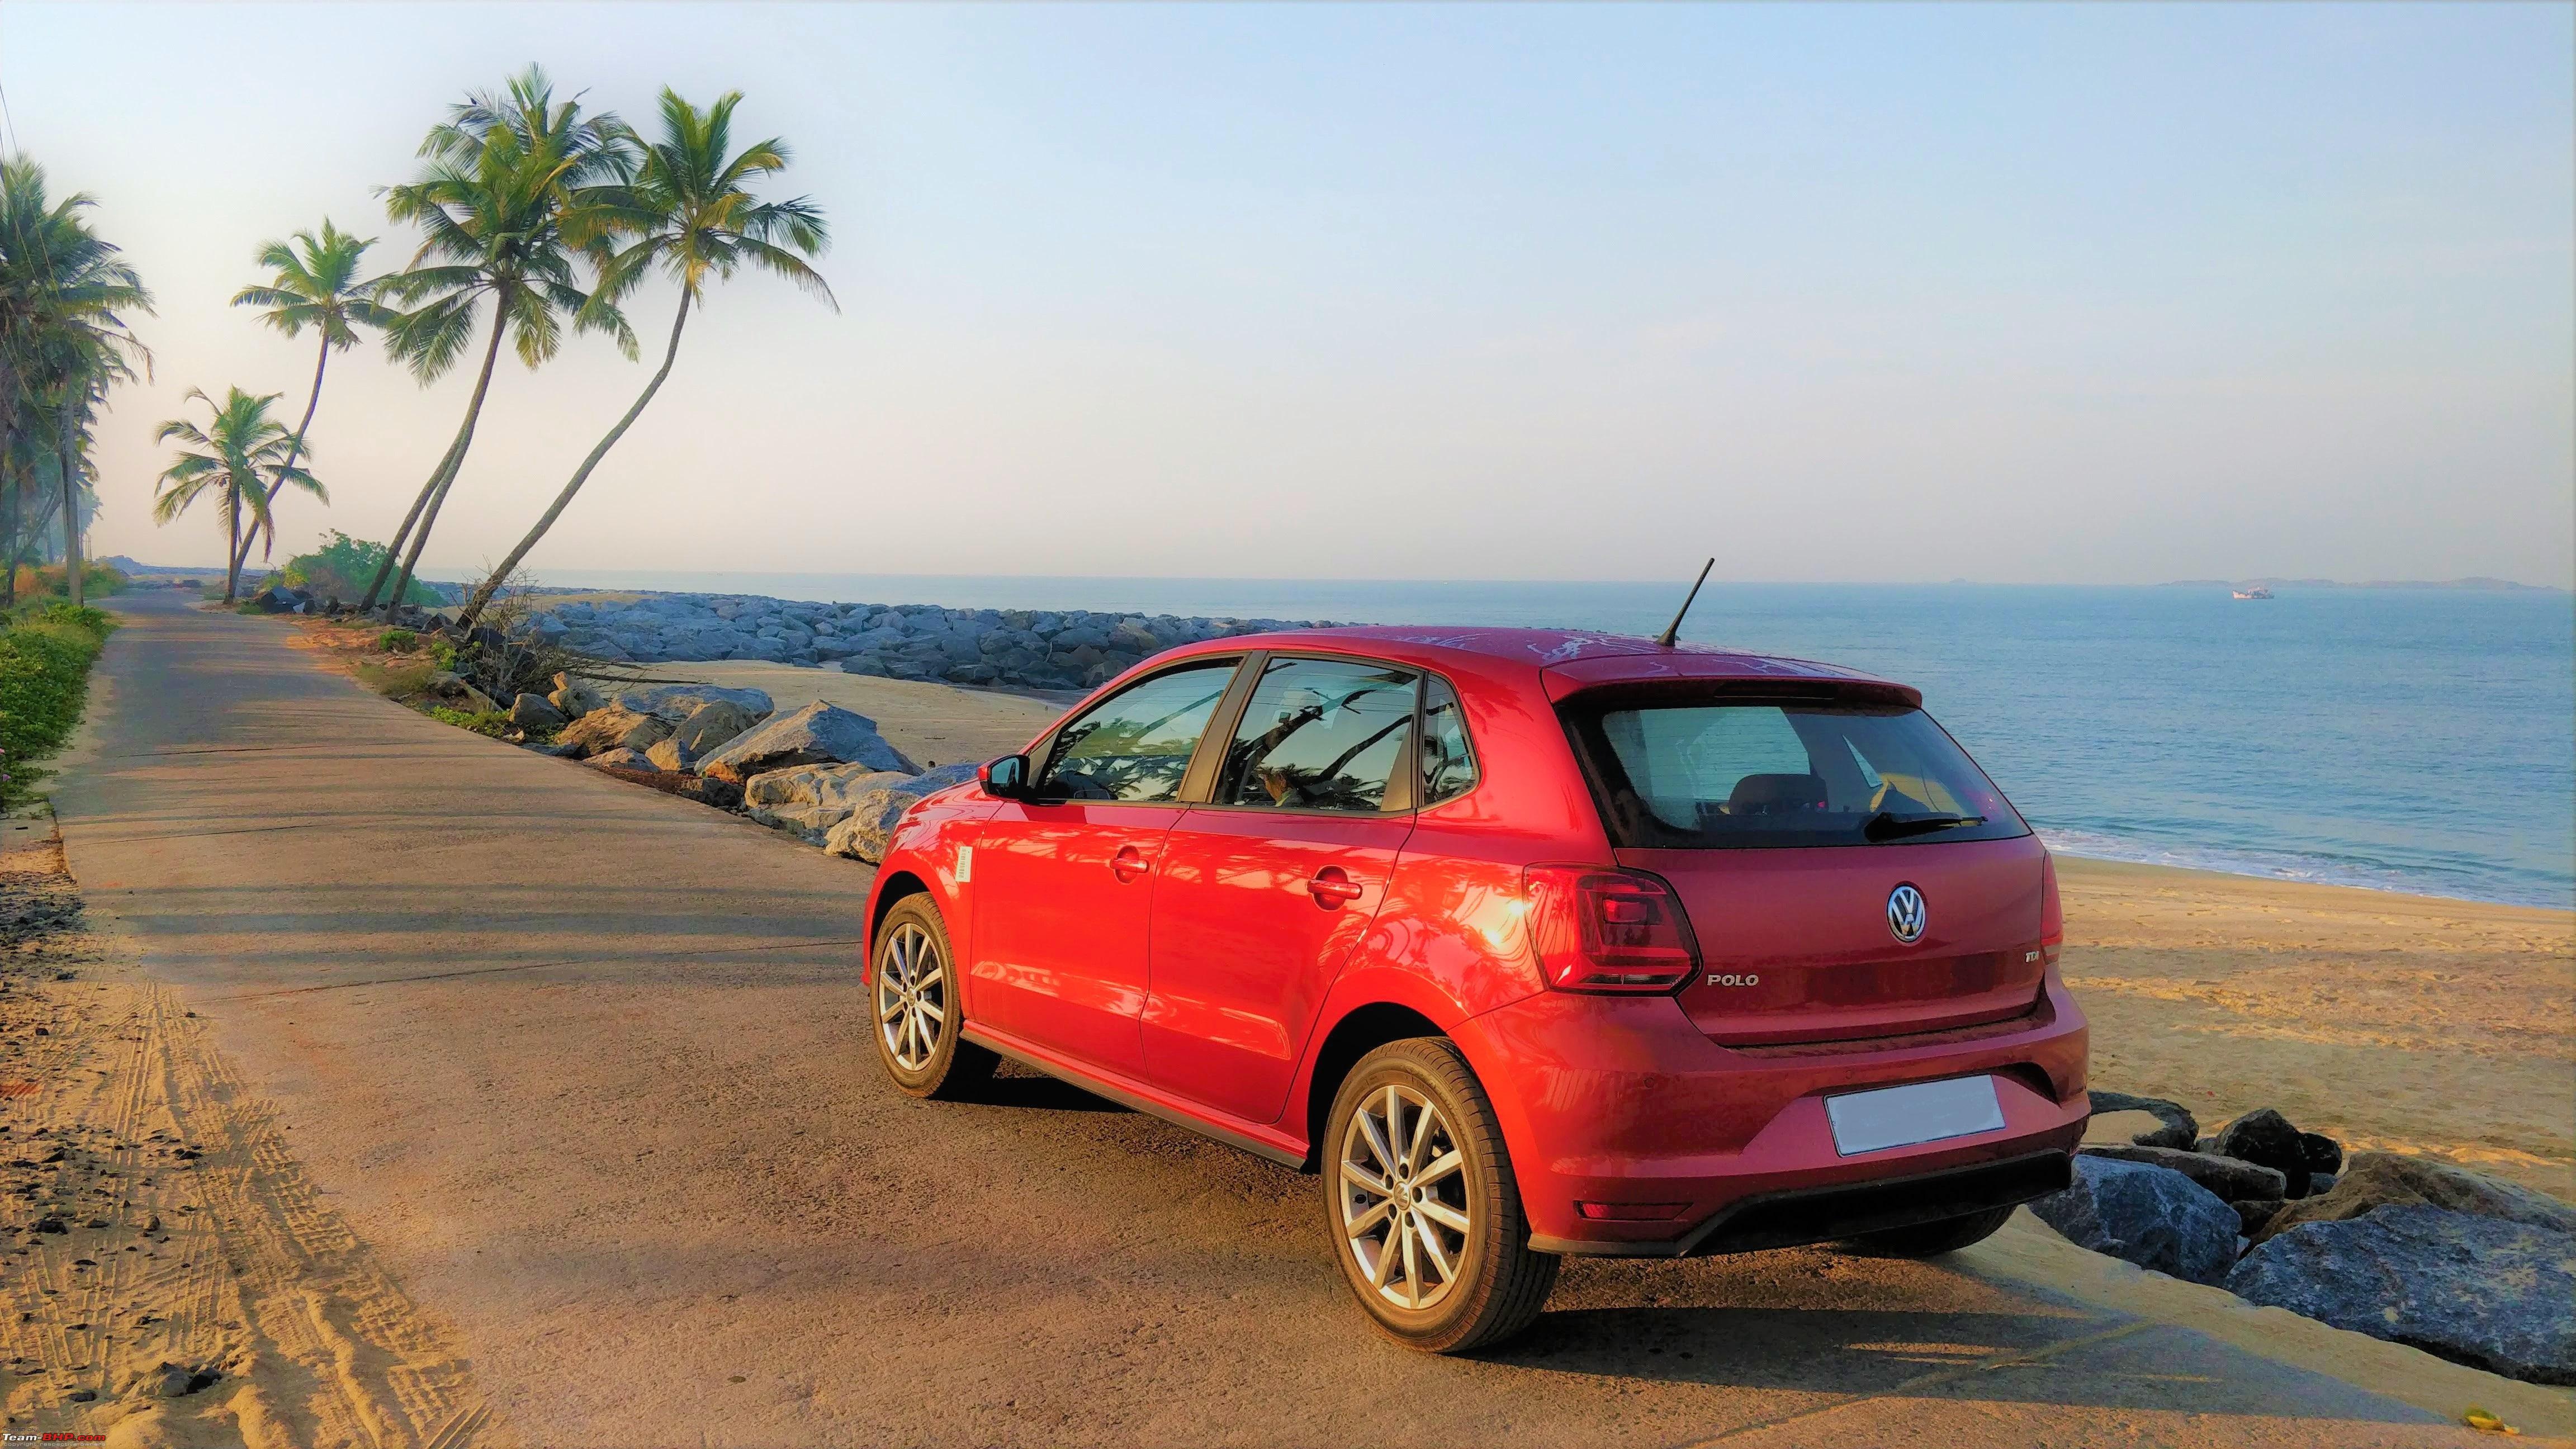 Volkswagen Polo 1.5 TDI Highline : 12,000 km and a year - Team-BHP